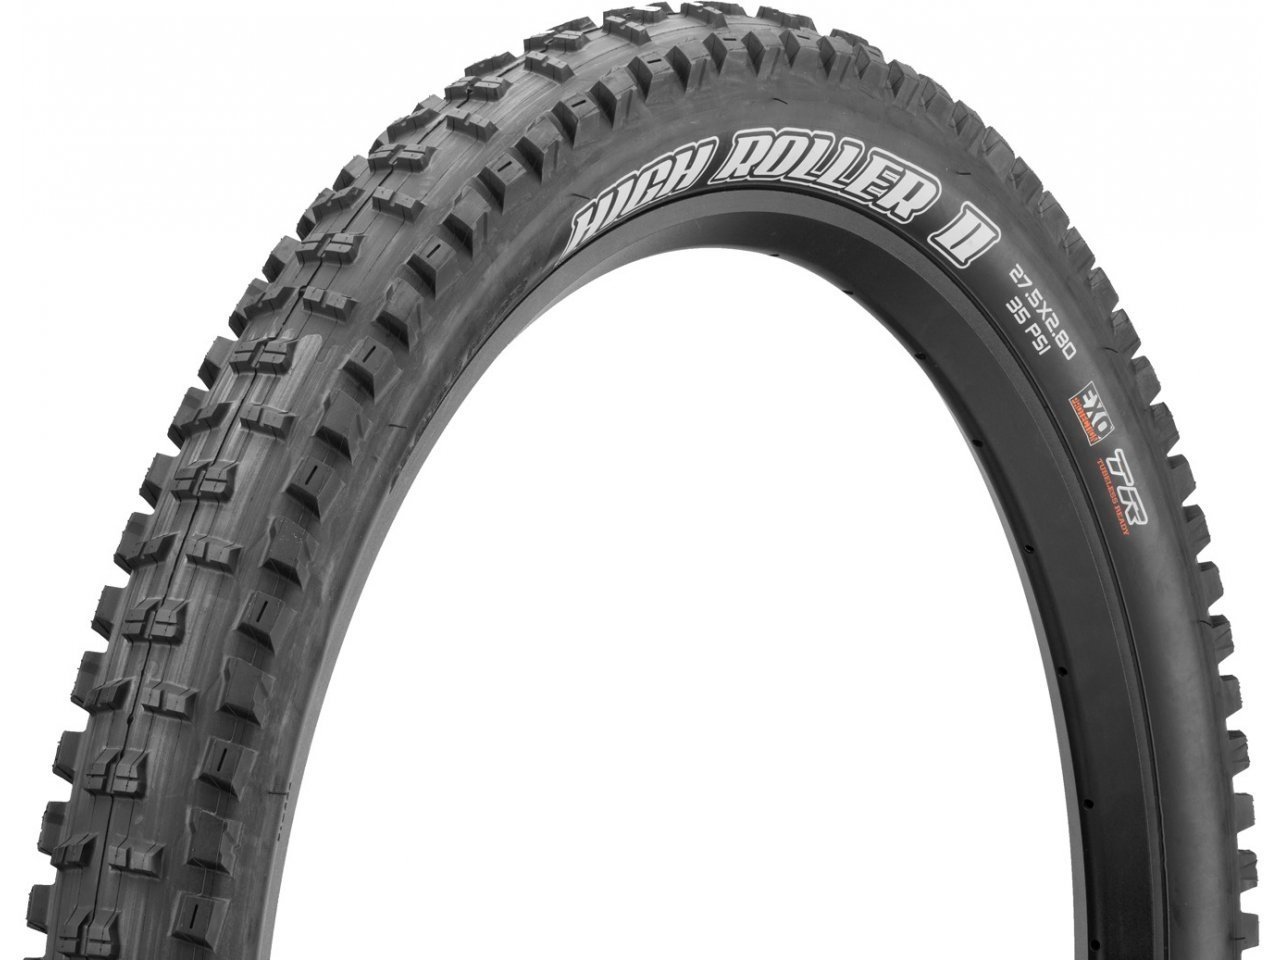 Велопокрышка MAXXIS HIGH ROLLER II 27.5X3.0 M325 F TLR DK62 BK 5392/475 2PLHO+MO 3LY, черный, ETB91154100 voxelab fdm aquila d1 3d printer direct extruder 25 point auto leveling 300℃ high temp dual z axis 235 235 250 mm 3d printing